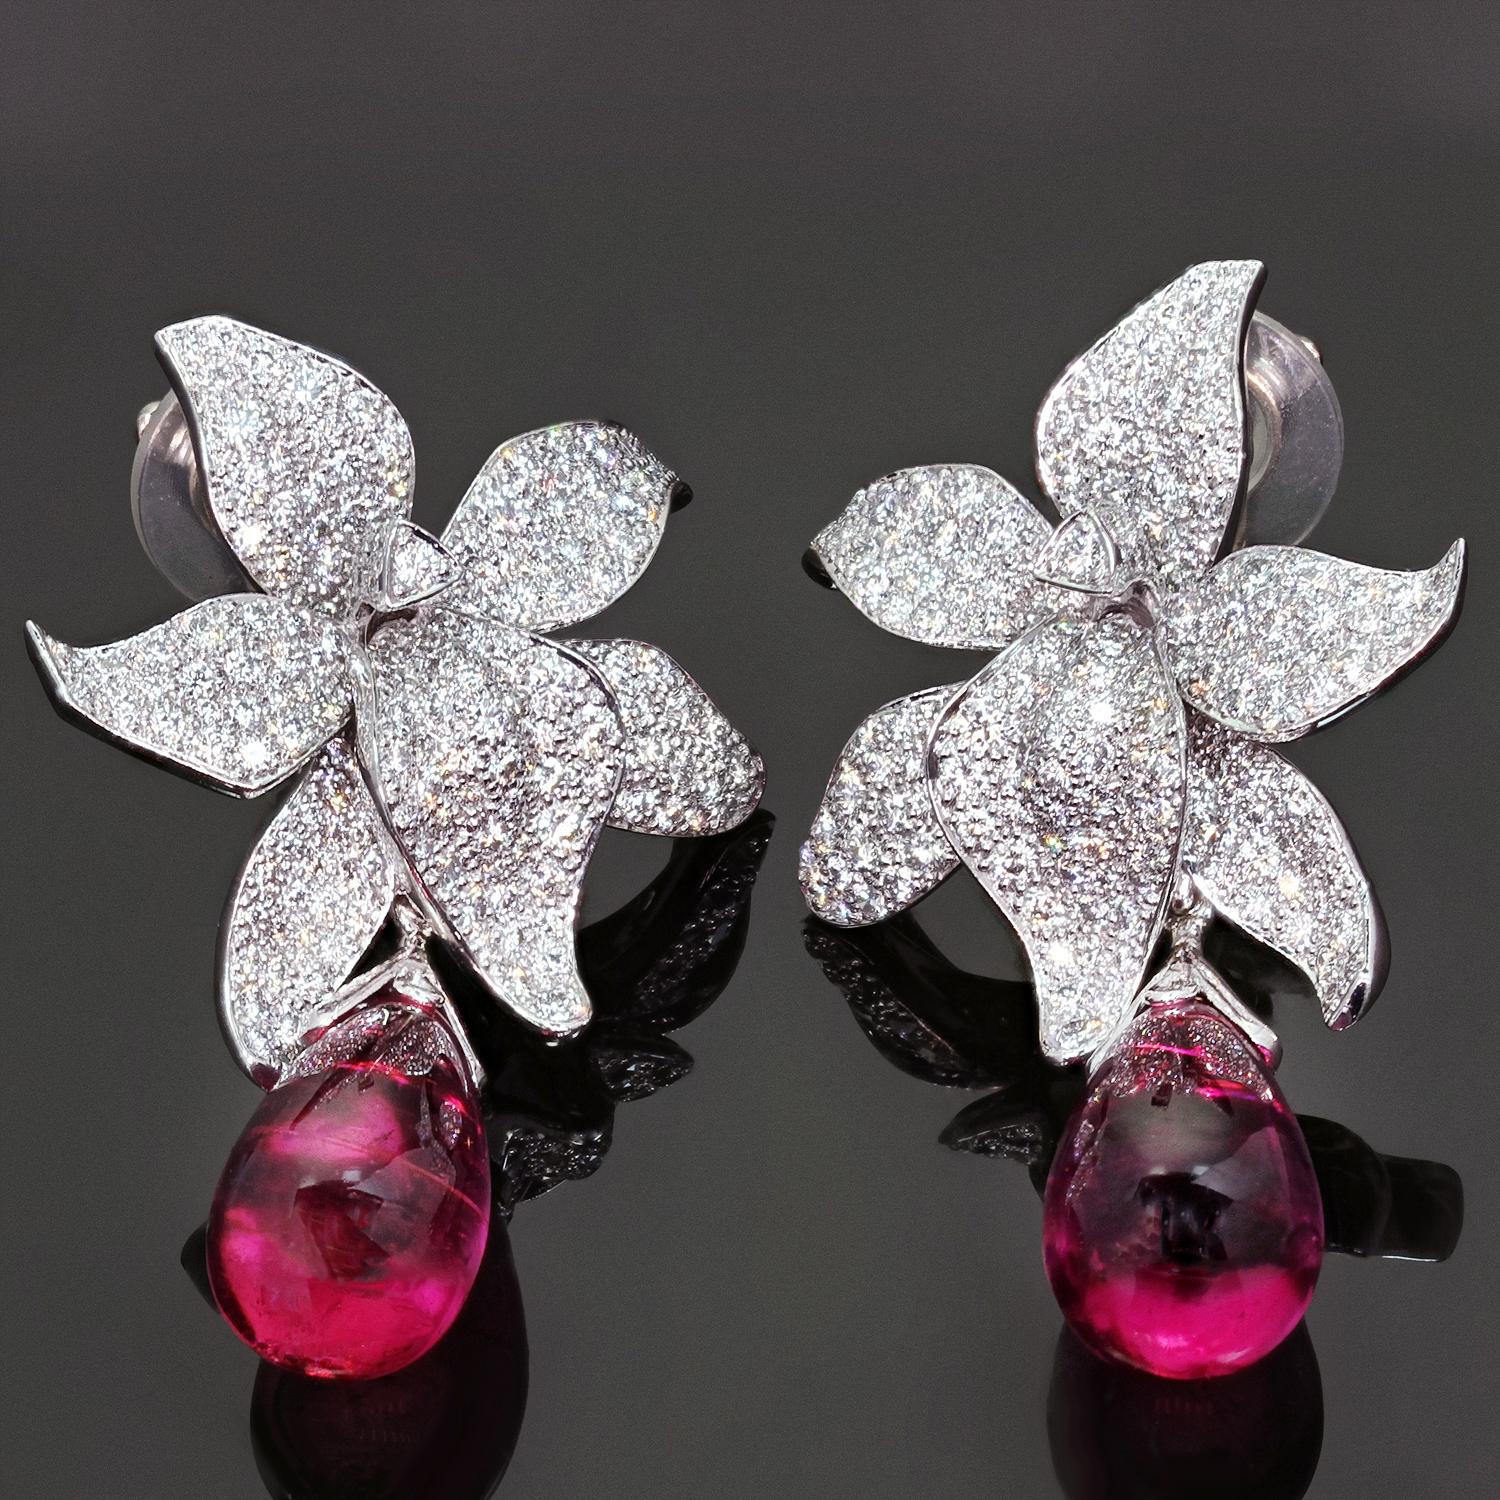 These magnificent Cartier clip-on earrings from the stunning Caresse D'Orchidees High Jewelry collection feature a gorgeous orchid flower design crafted in platinum, set with approximately 282 round brilliant D-E-F VVS1-VVS2 diamonds weighing an